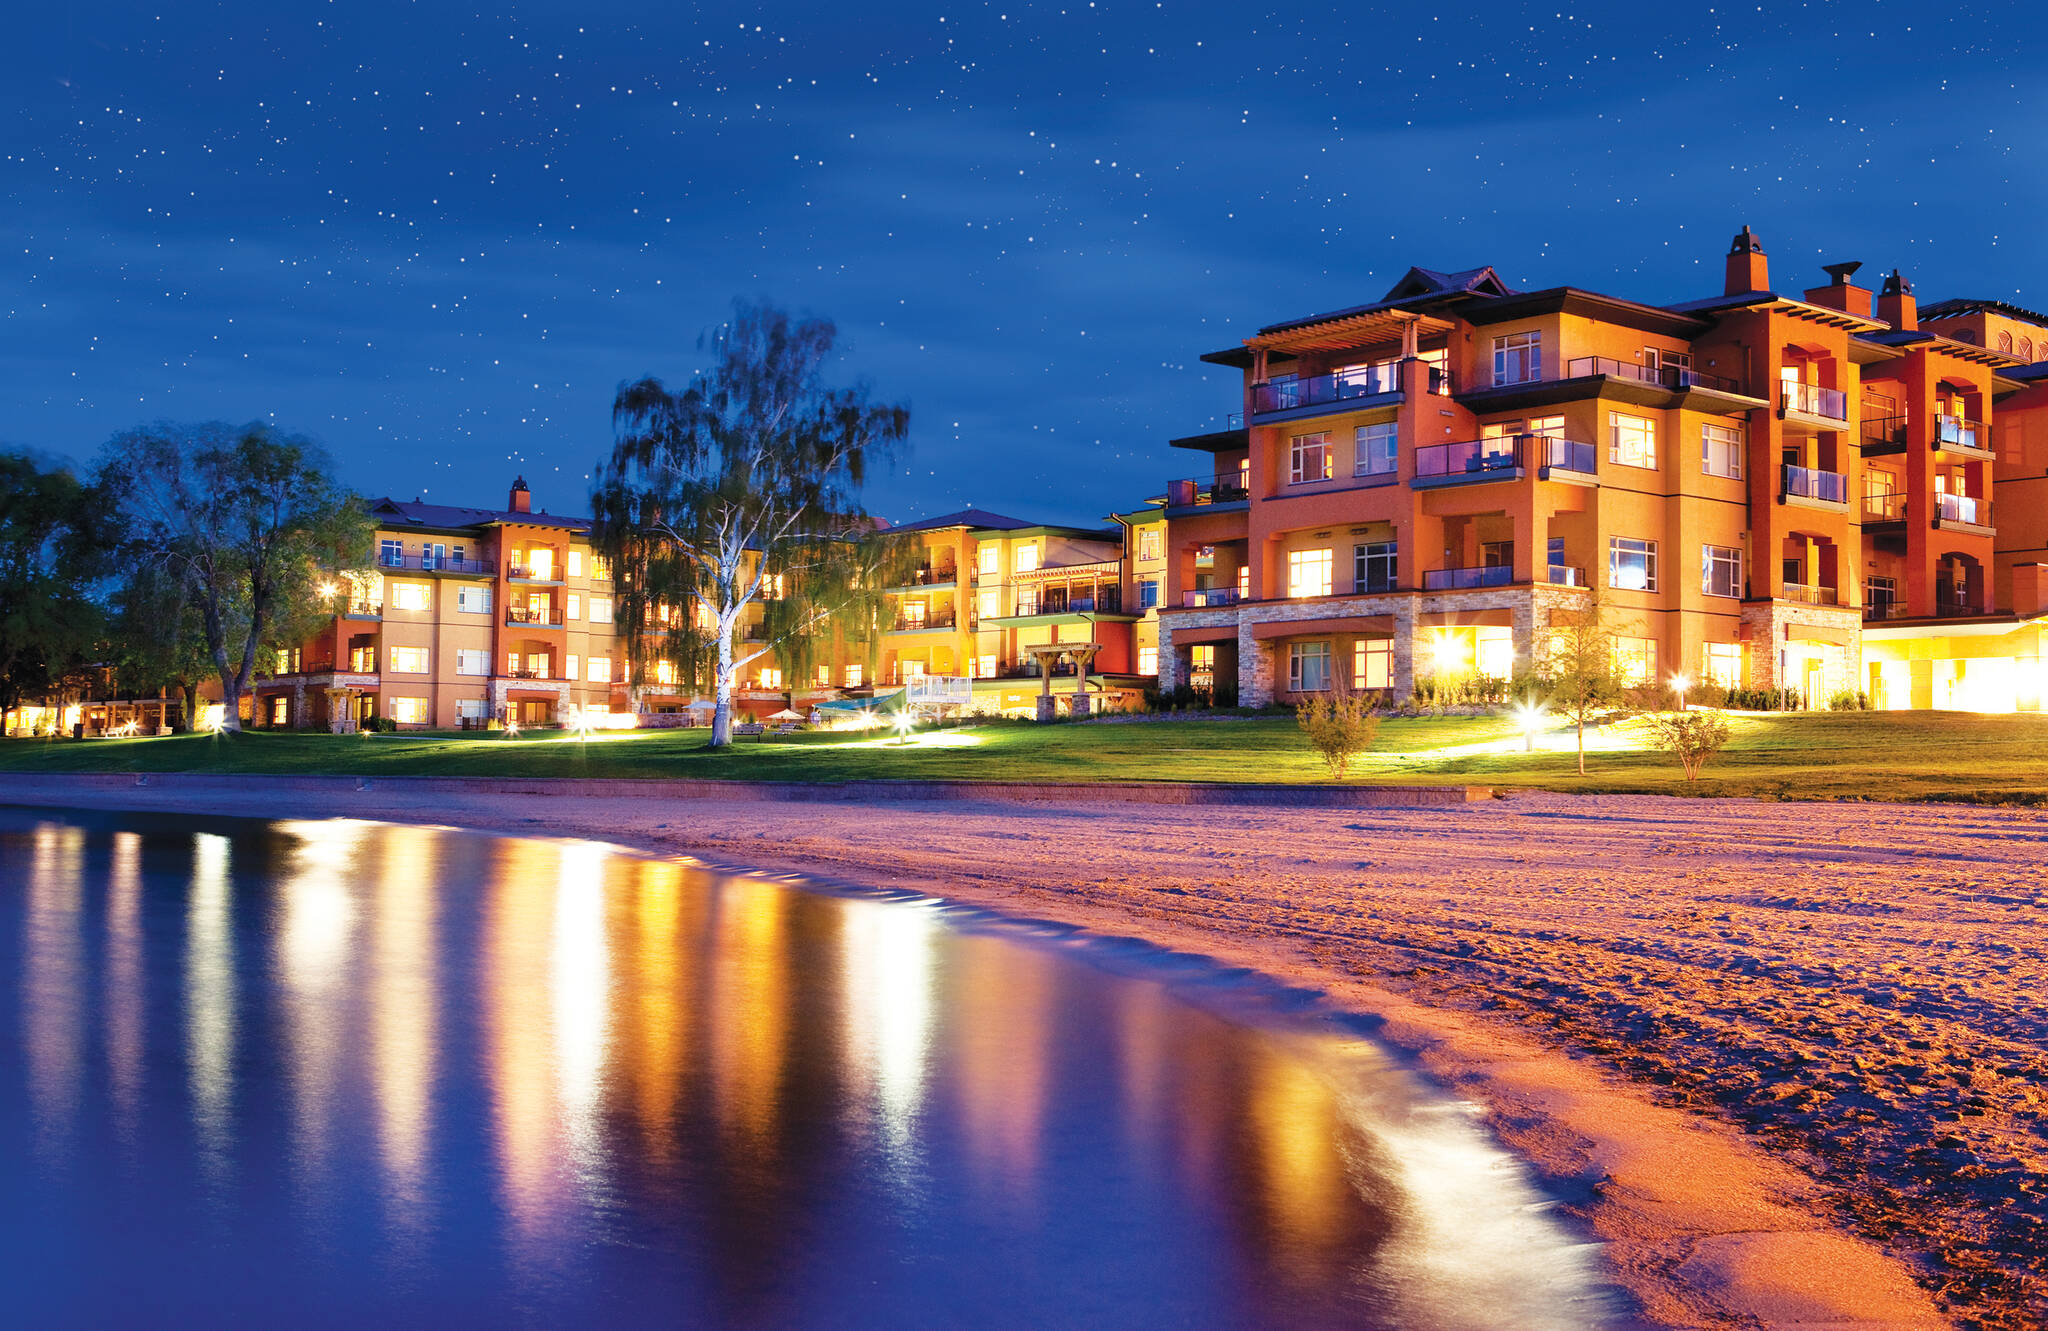 A three-night stay at Watermark Beach Resort is part of a sensational prize from Oliver Osoyoos Wine Country valued at more than $4,000. Visit WestCoastTraveller.coms contest page to enter!